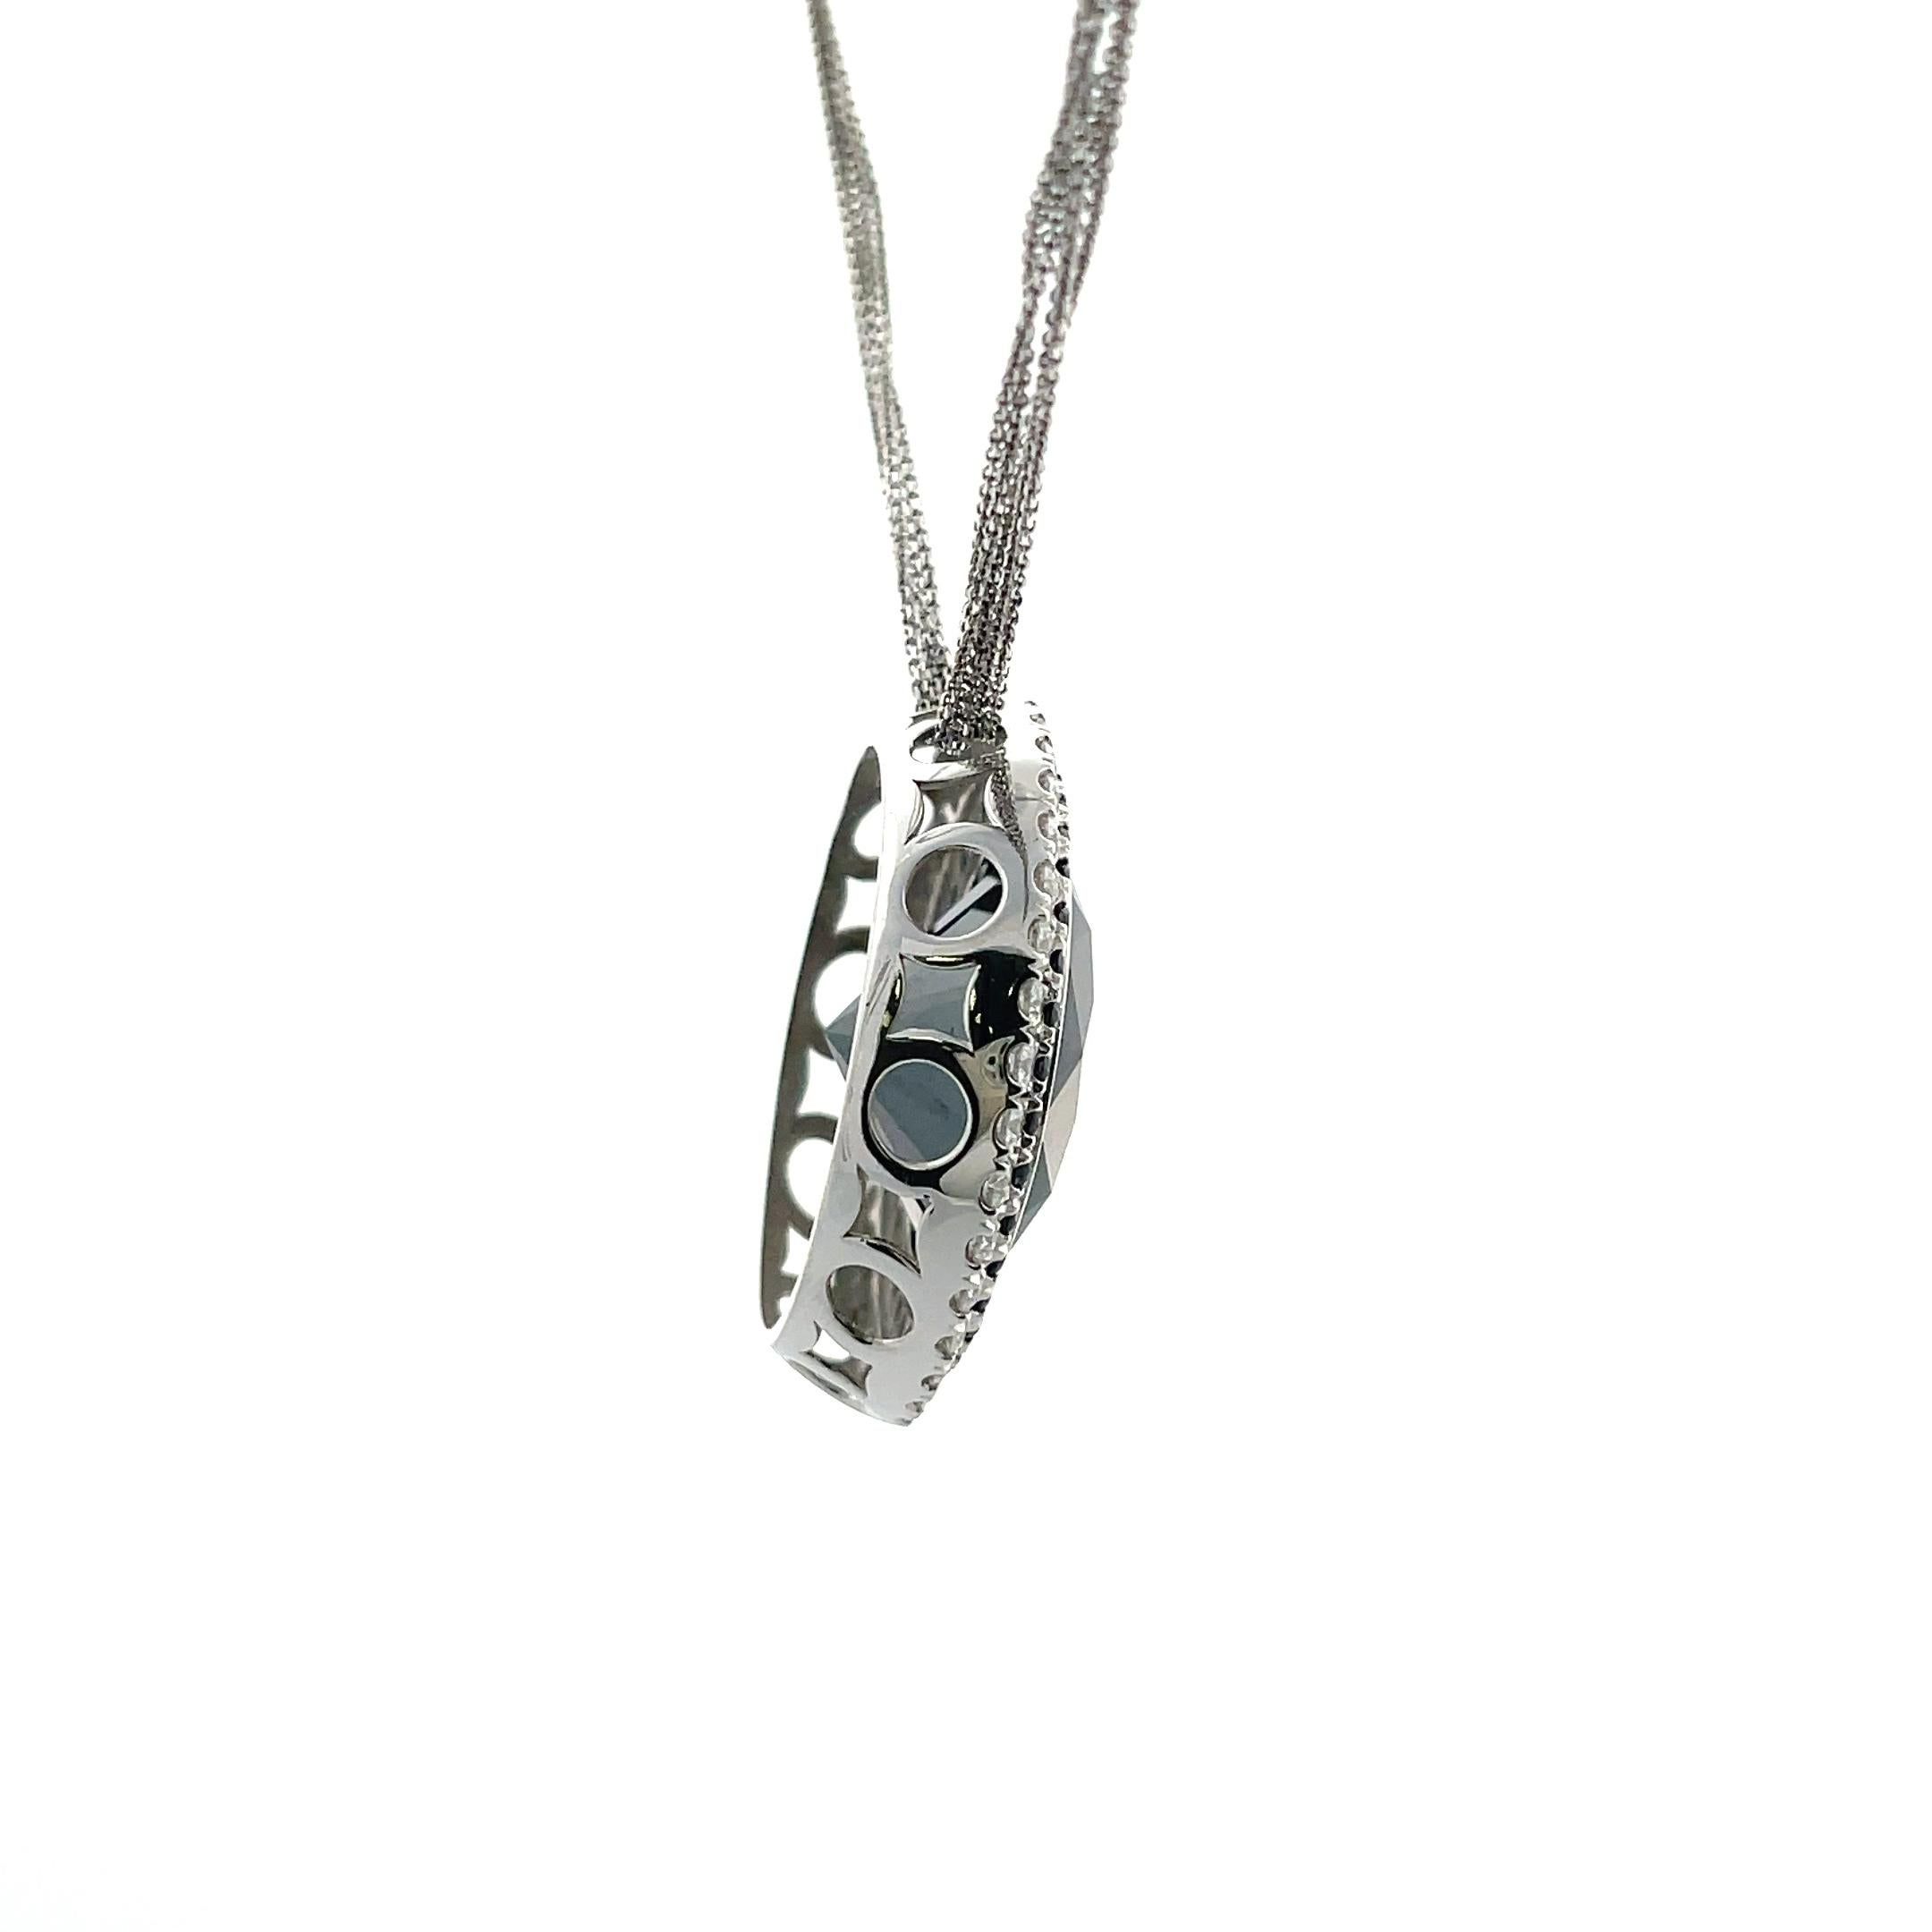 One, 30.34 Round Hematite with a double halo of both round black and white diamonds all set in 14K White Gold. 

The pendant is set on a multi-strand chain in 14K White Gold - 16